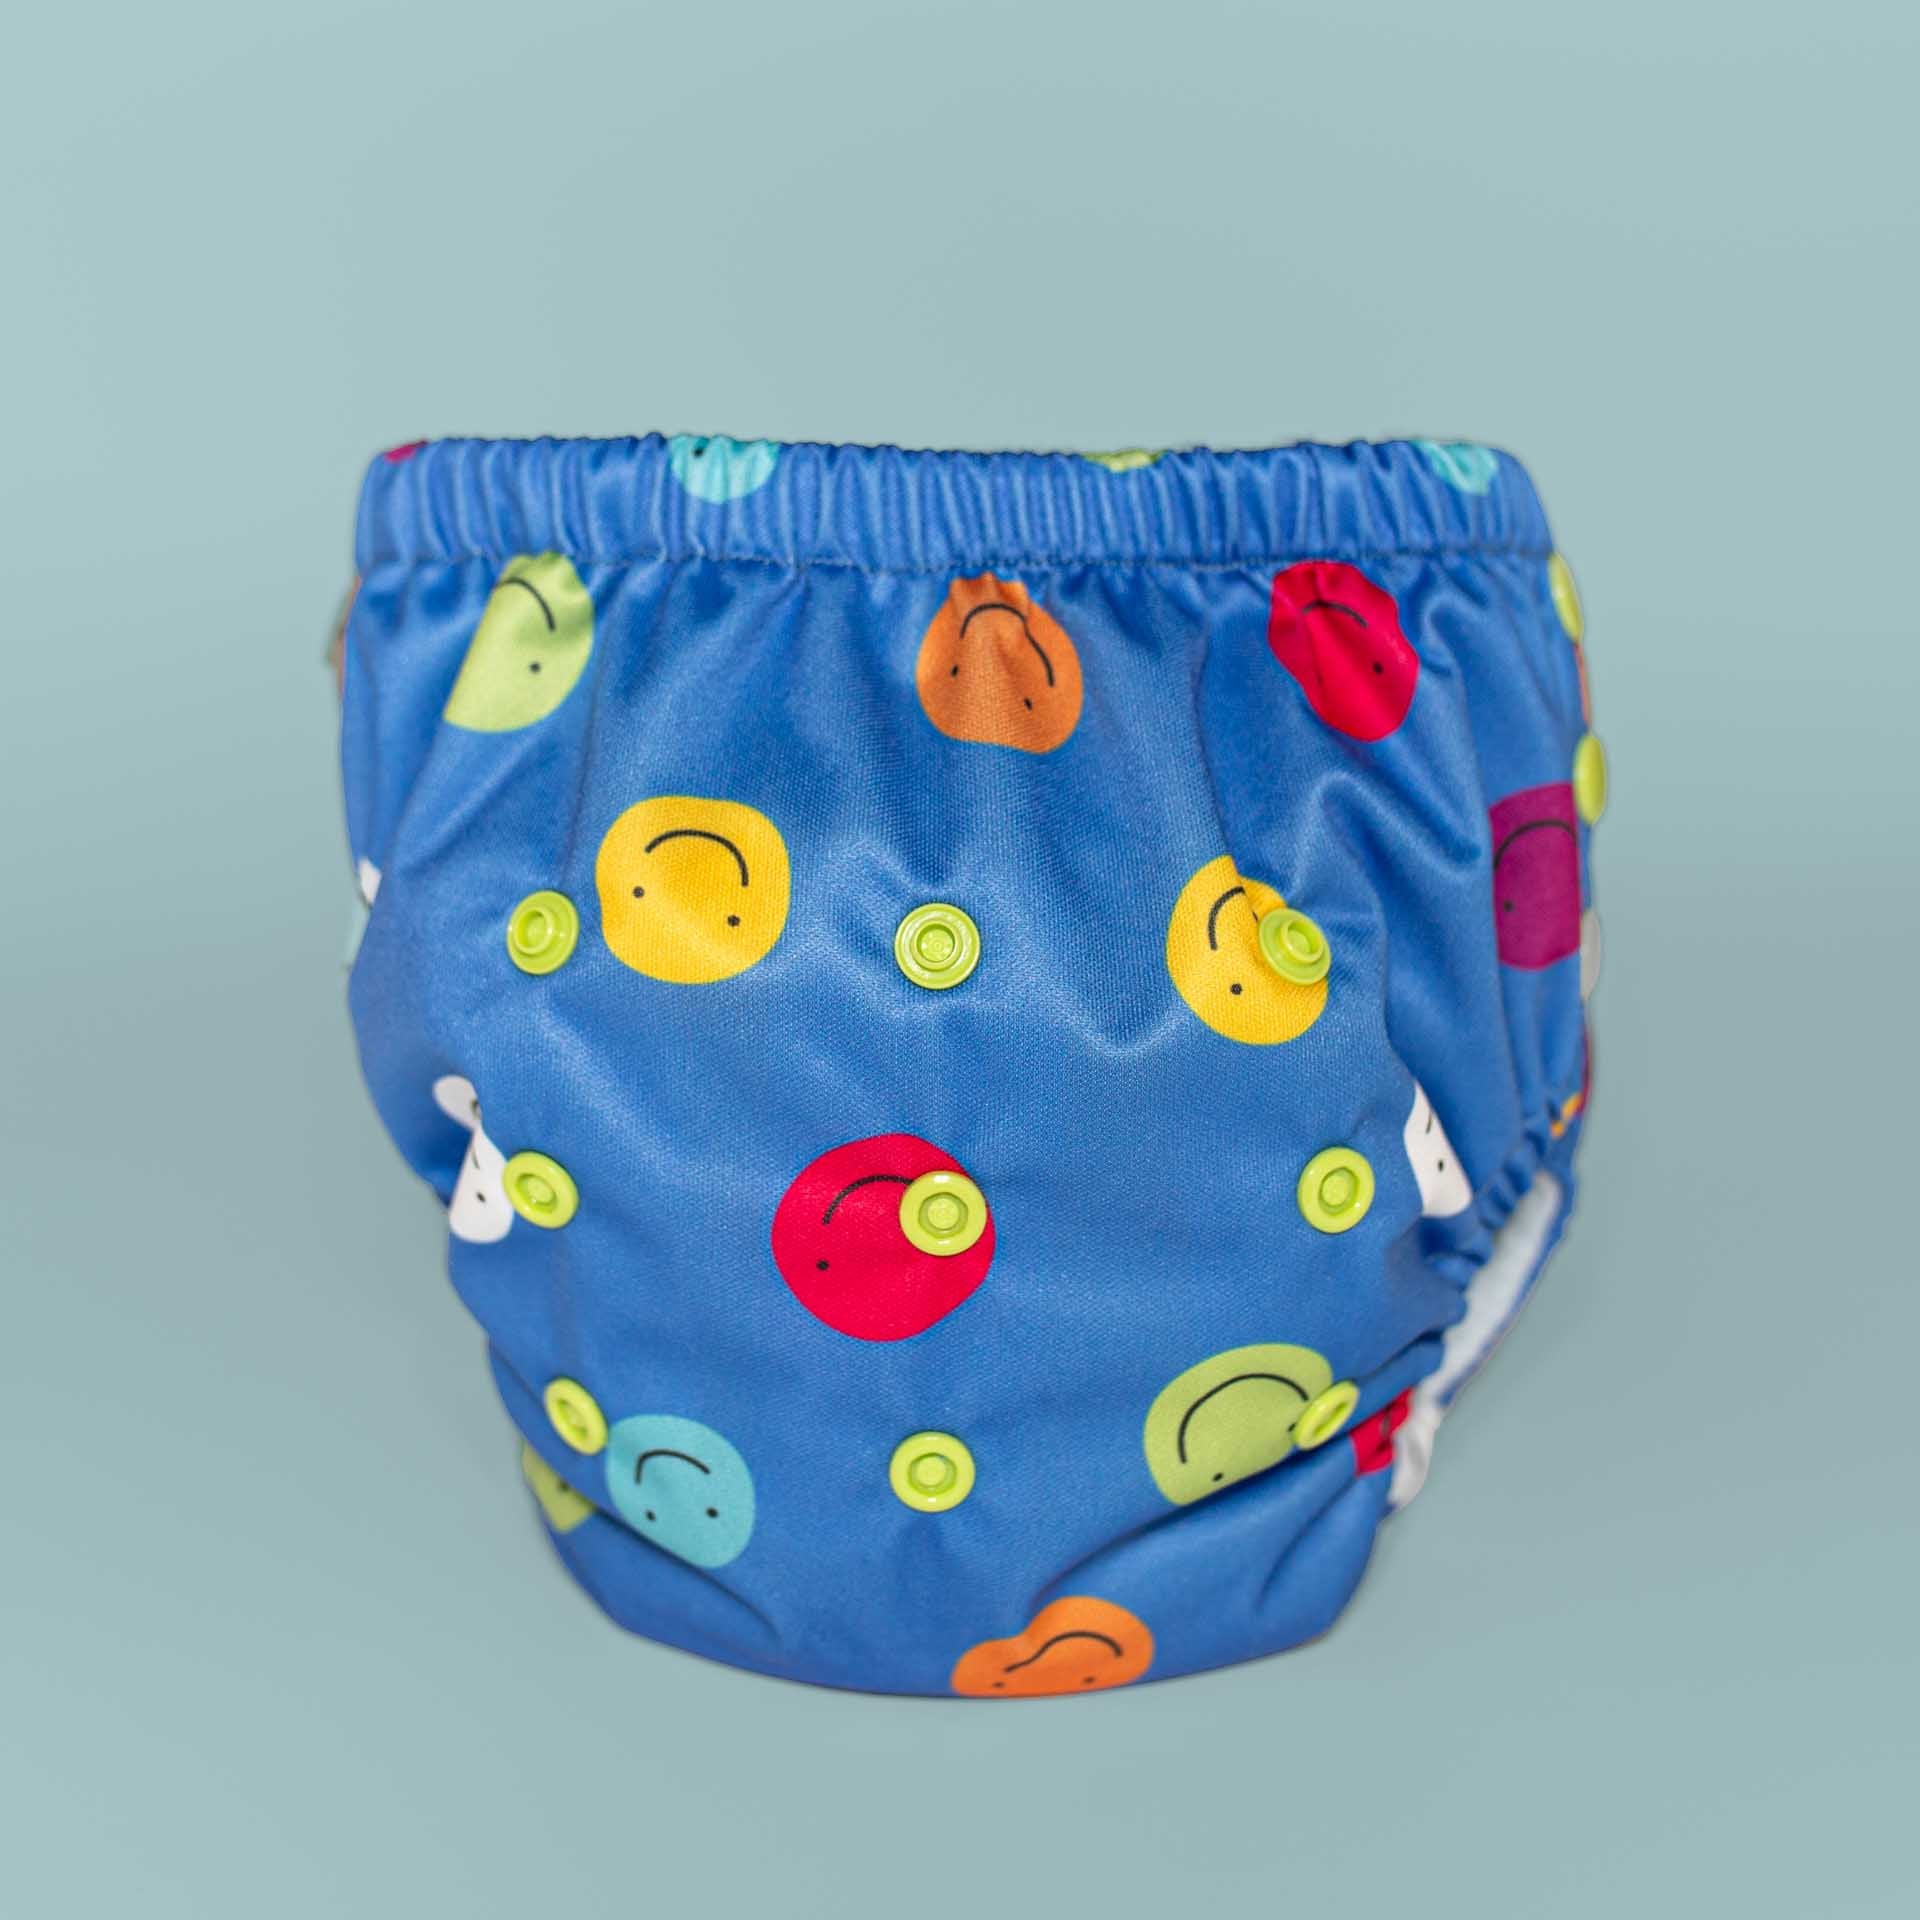 reusable cloth training pants for toddlers learning to use the potty wet feeling reusable pull up